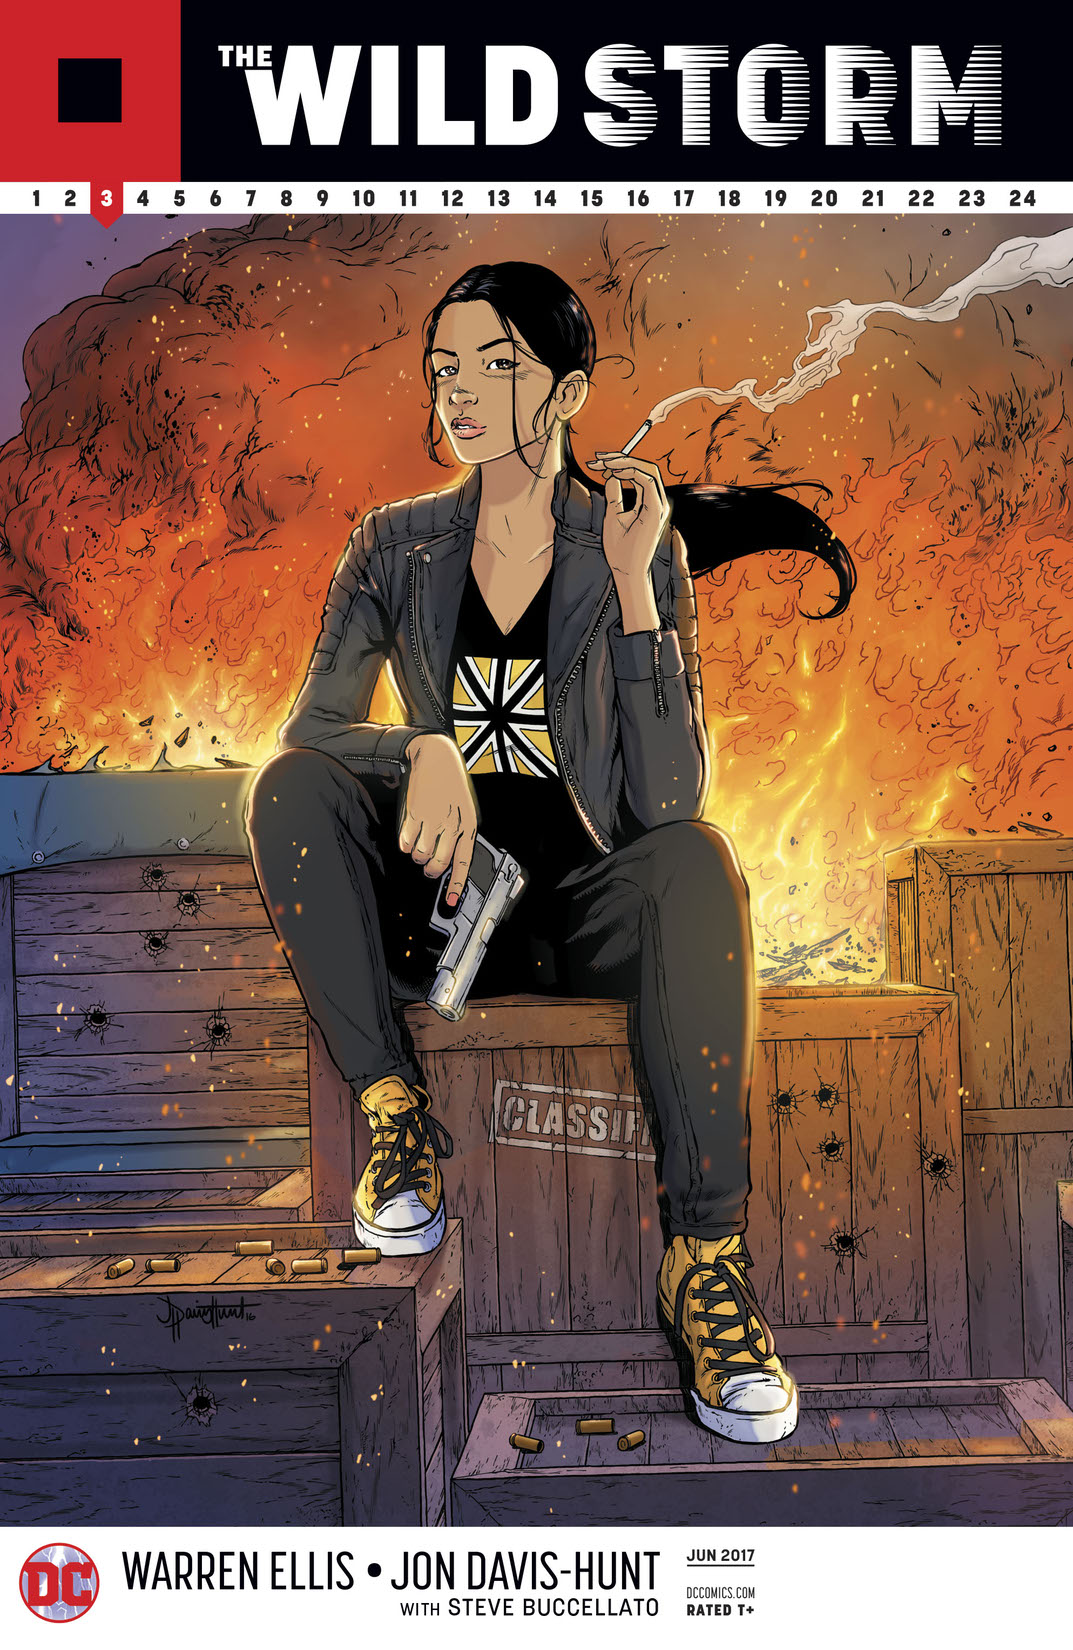 The Wild Storm #3 preview images